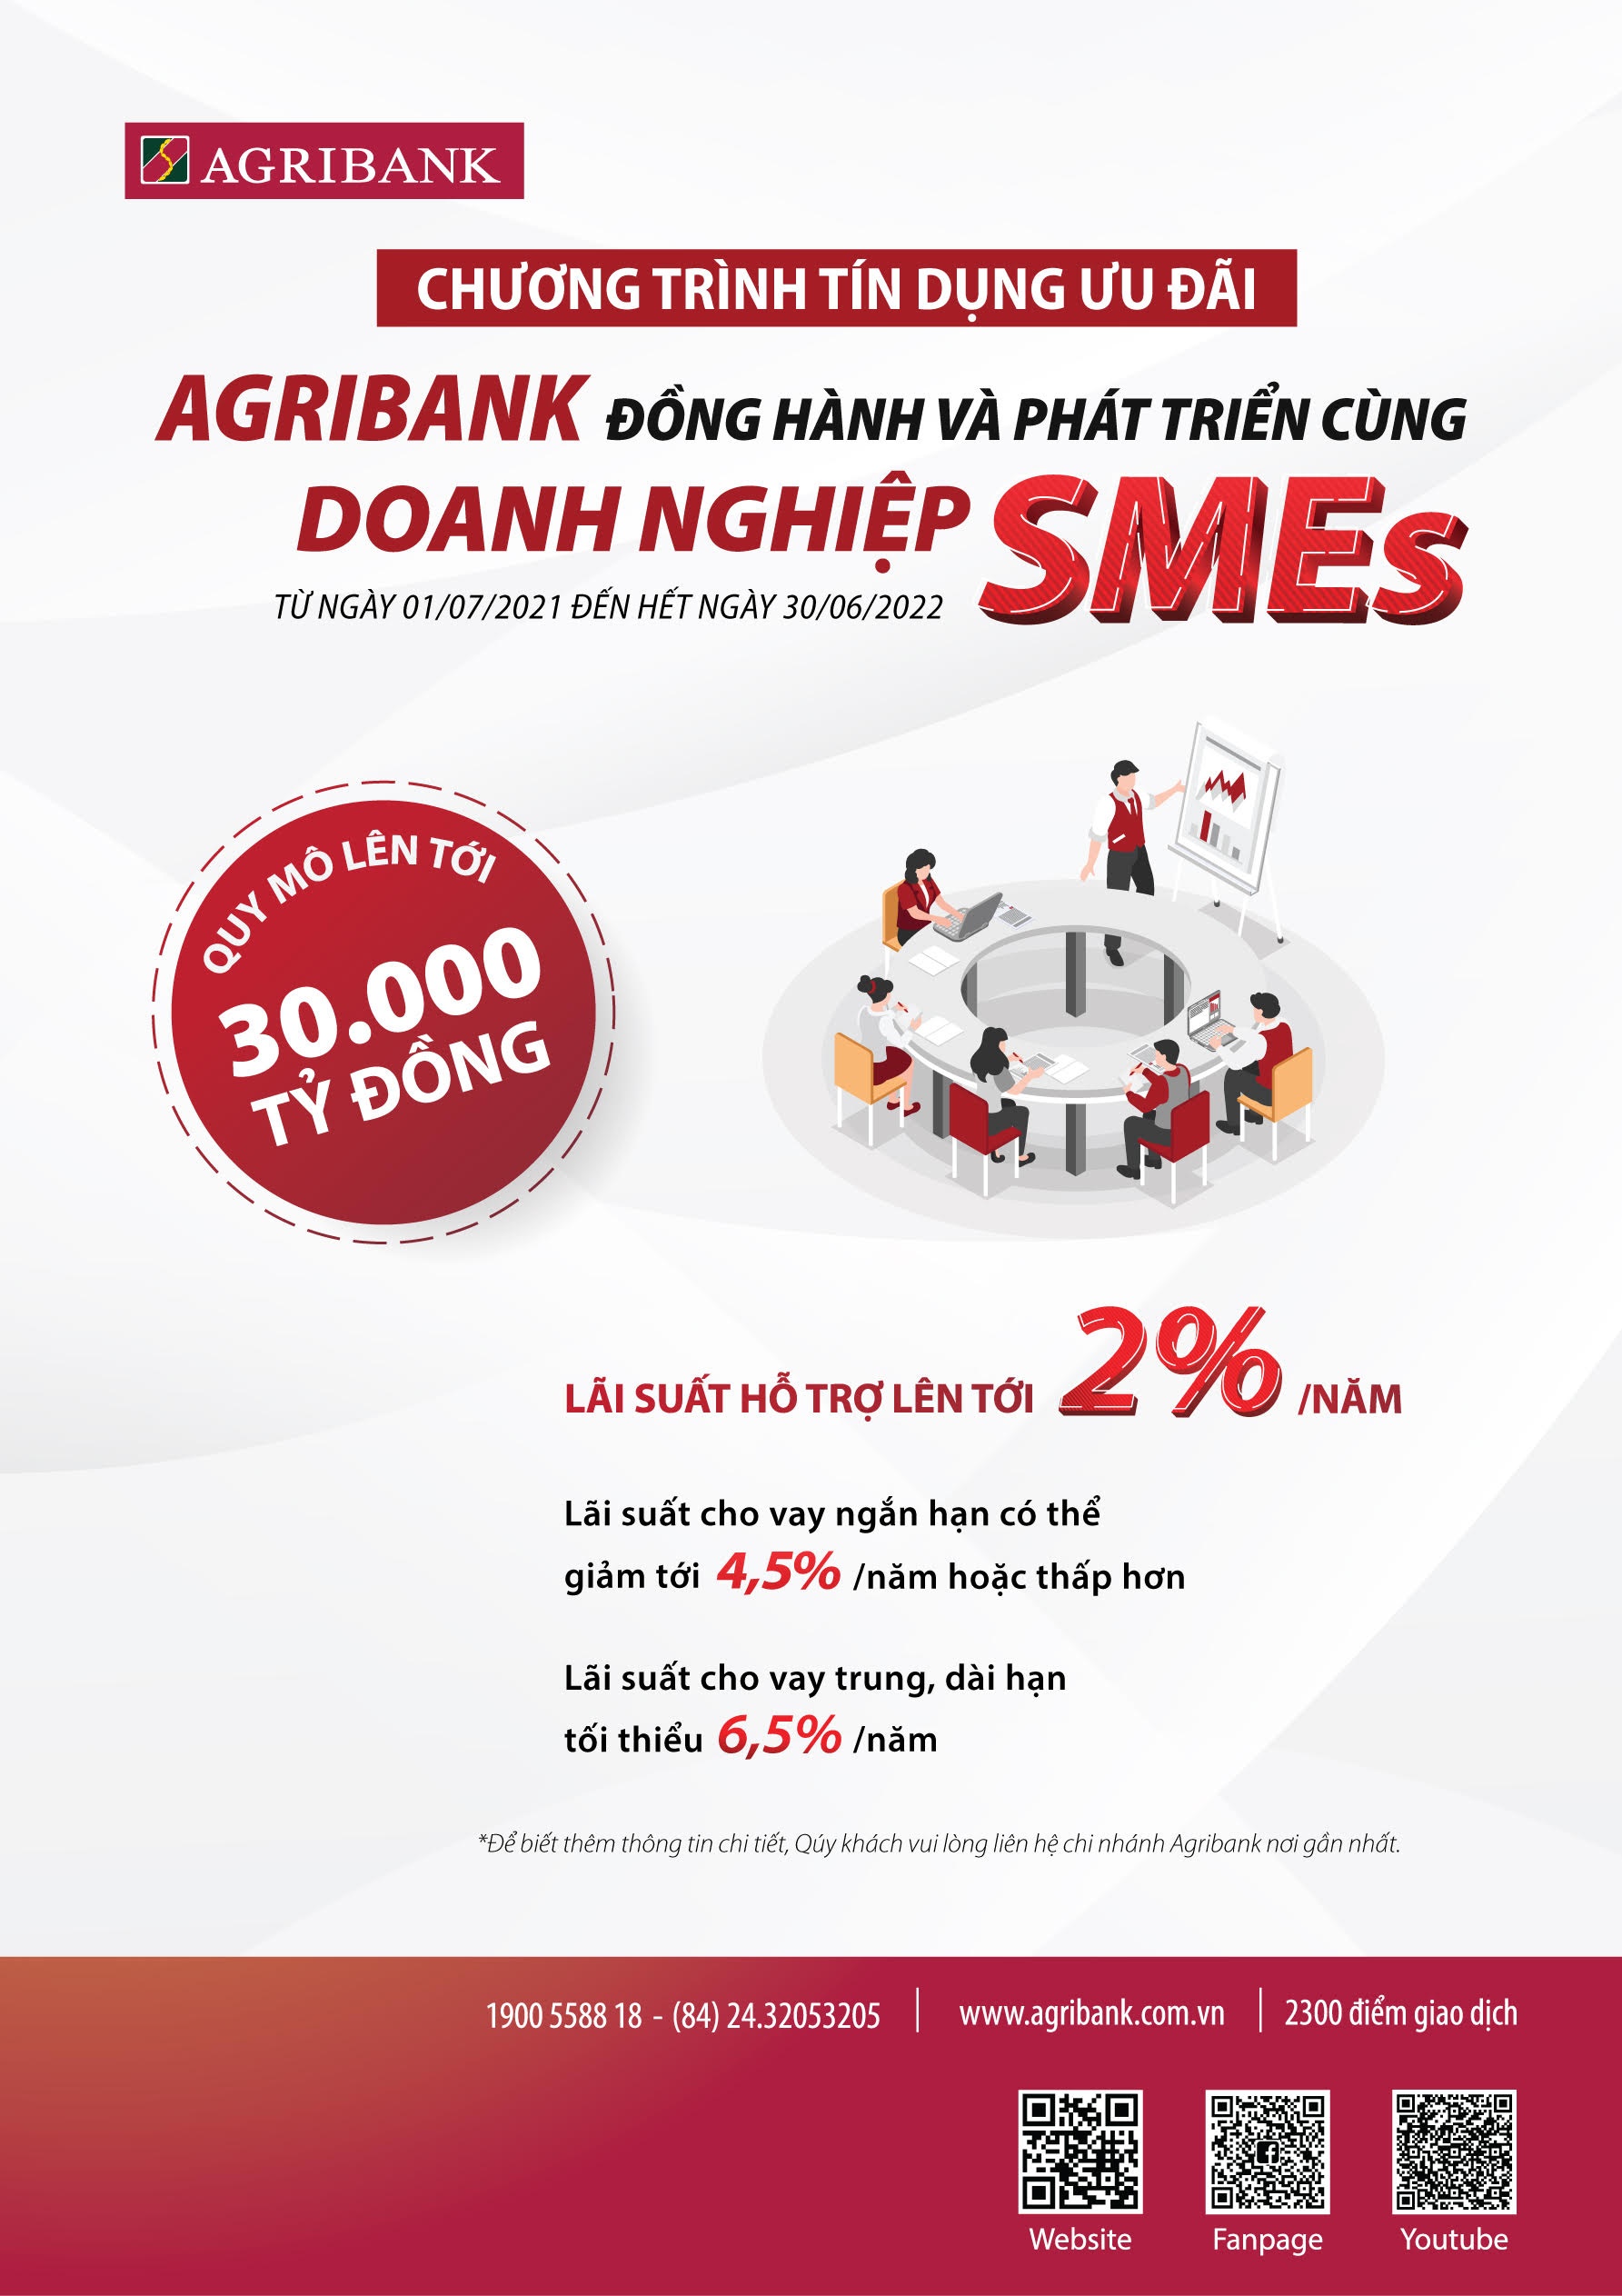 agribank tiep tuc danh 30000 ty dong de dong hanh va phat trien cung doanh nghiep smes